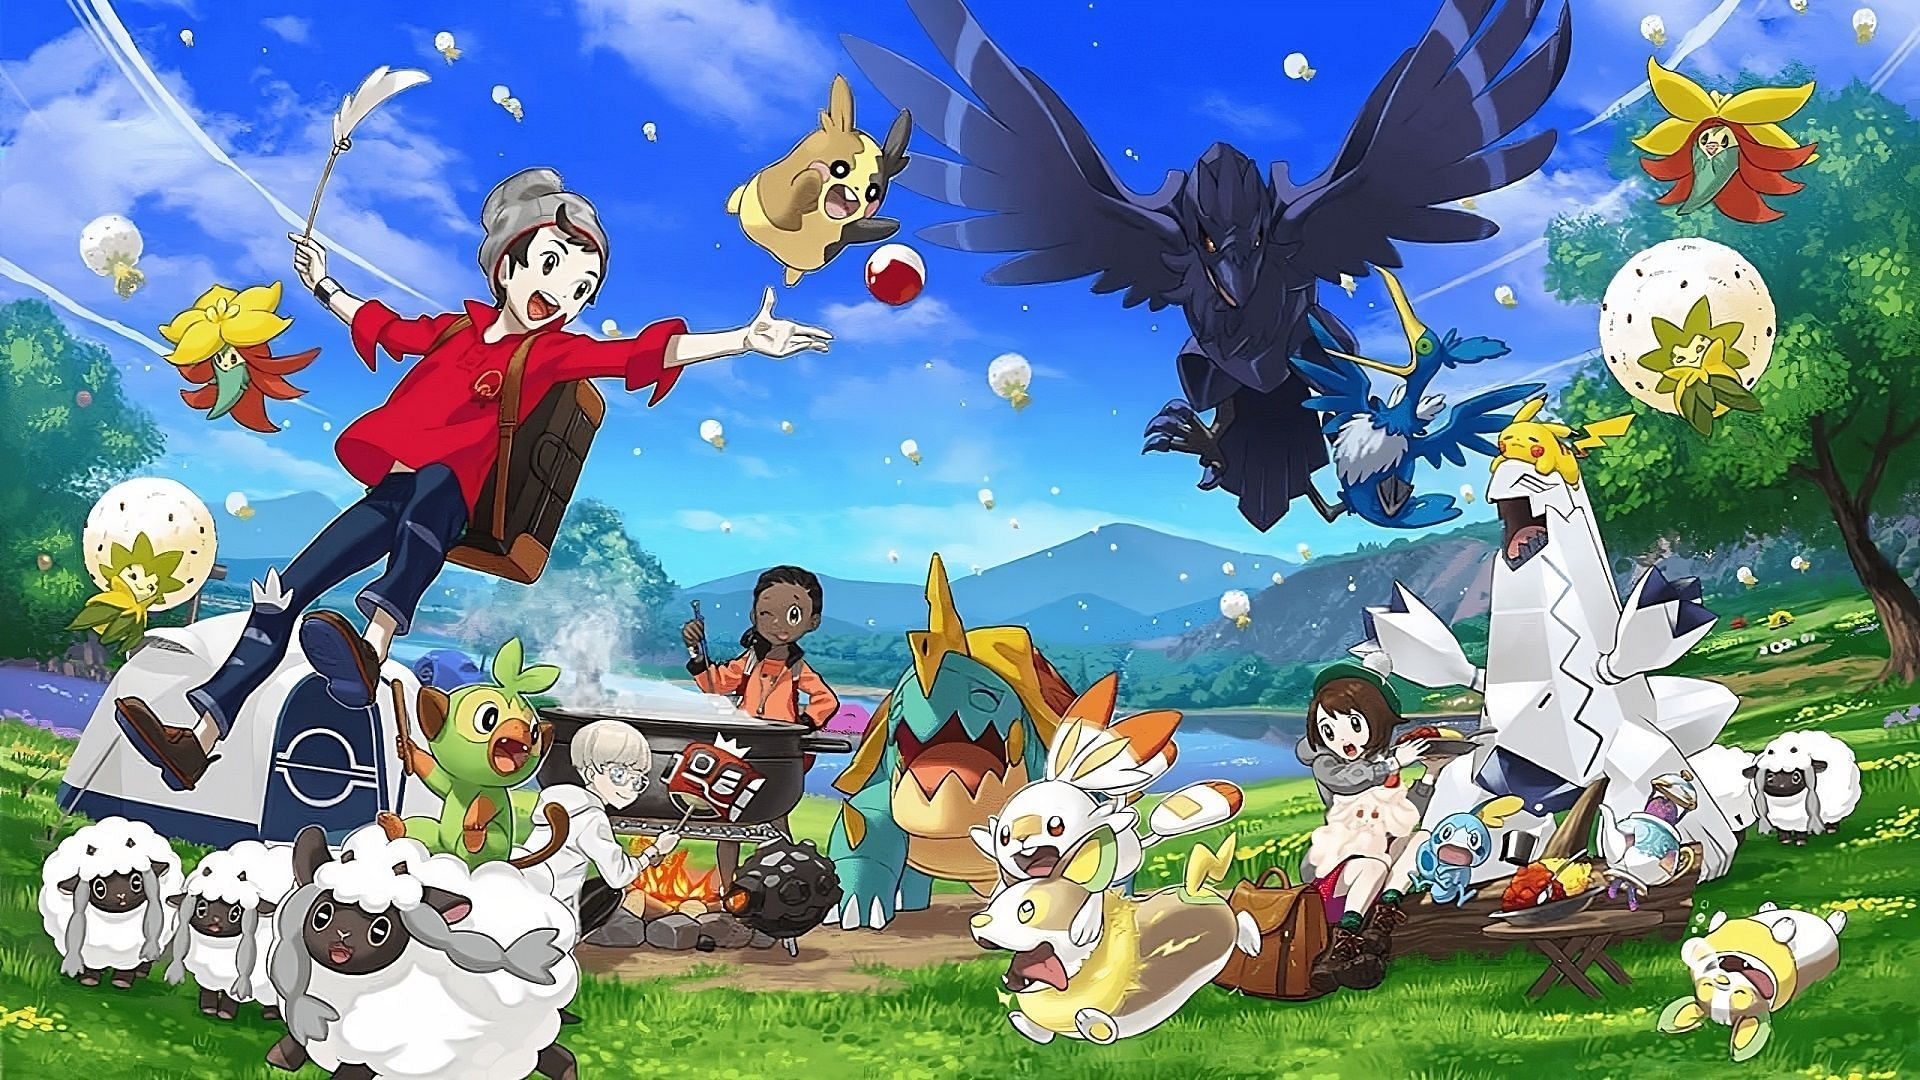 The Galar region is the home region of the Pokemon Sword and Shield games.